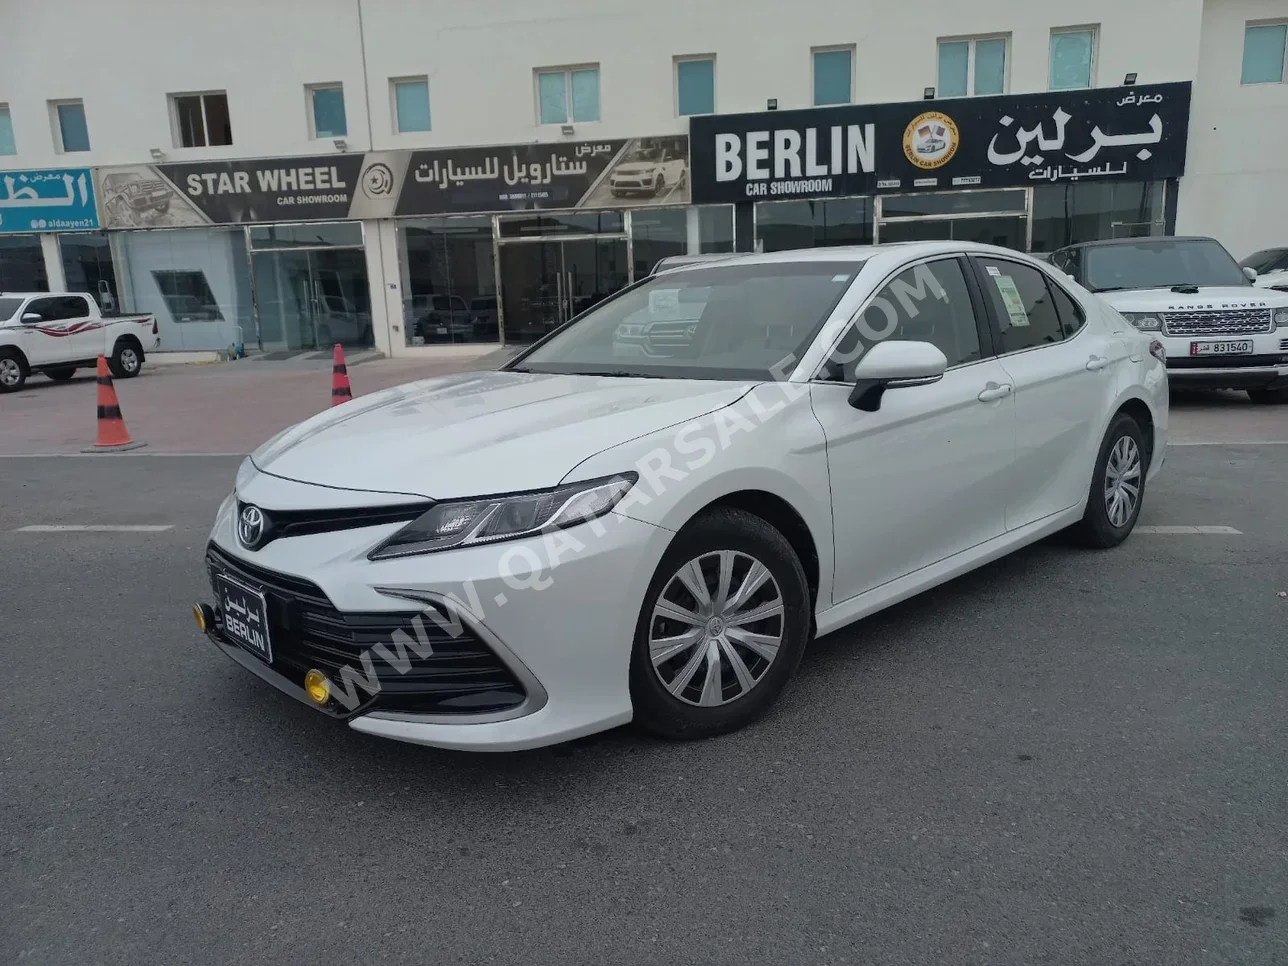 Toyota  Camry  LE  2023  Automatic  28,000 Km  4 Cylinder  Front Wheel Drive (FWD)  Sedan  White  With Warranty